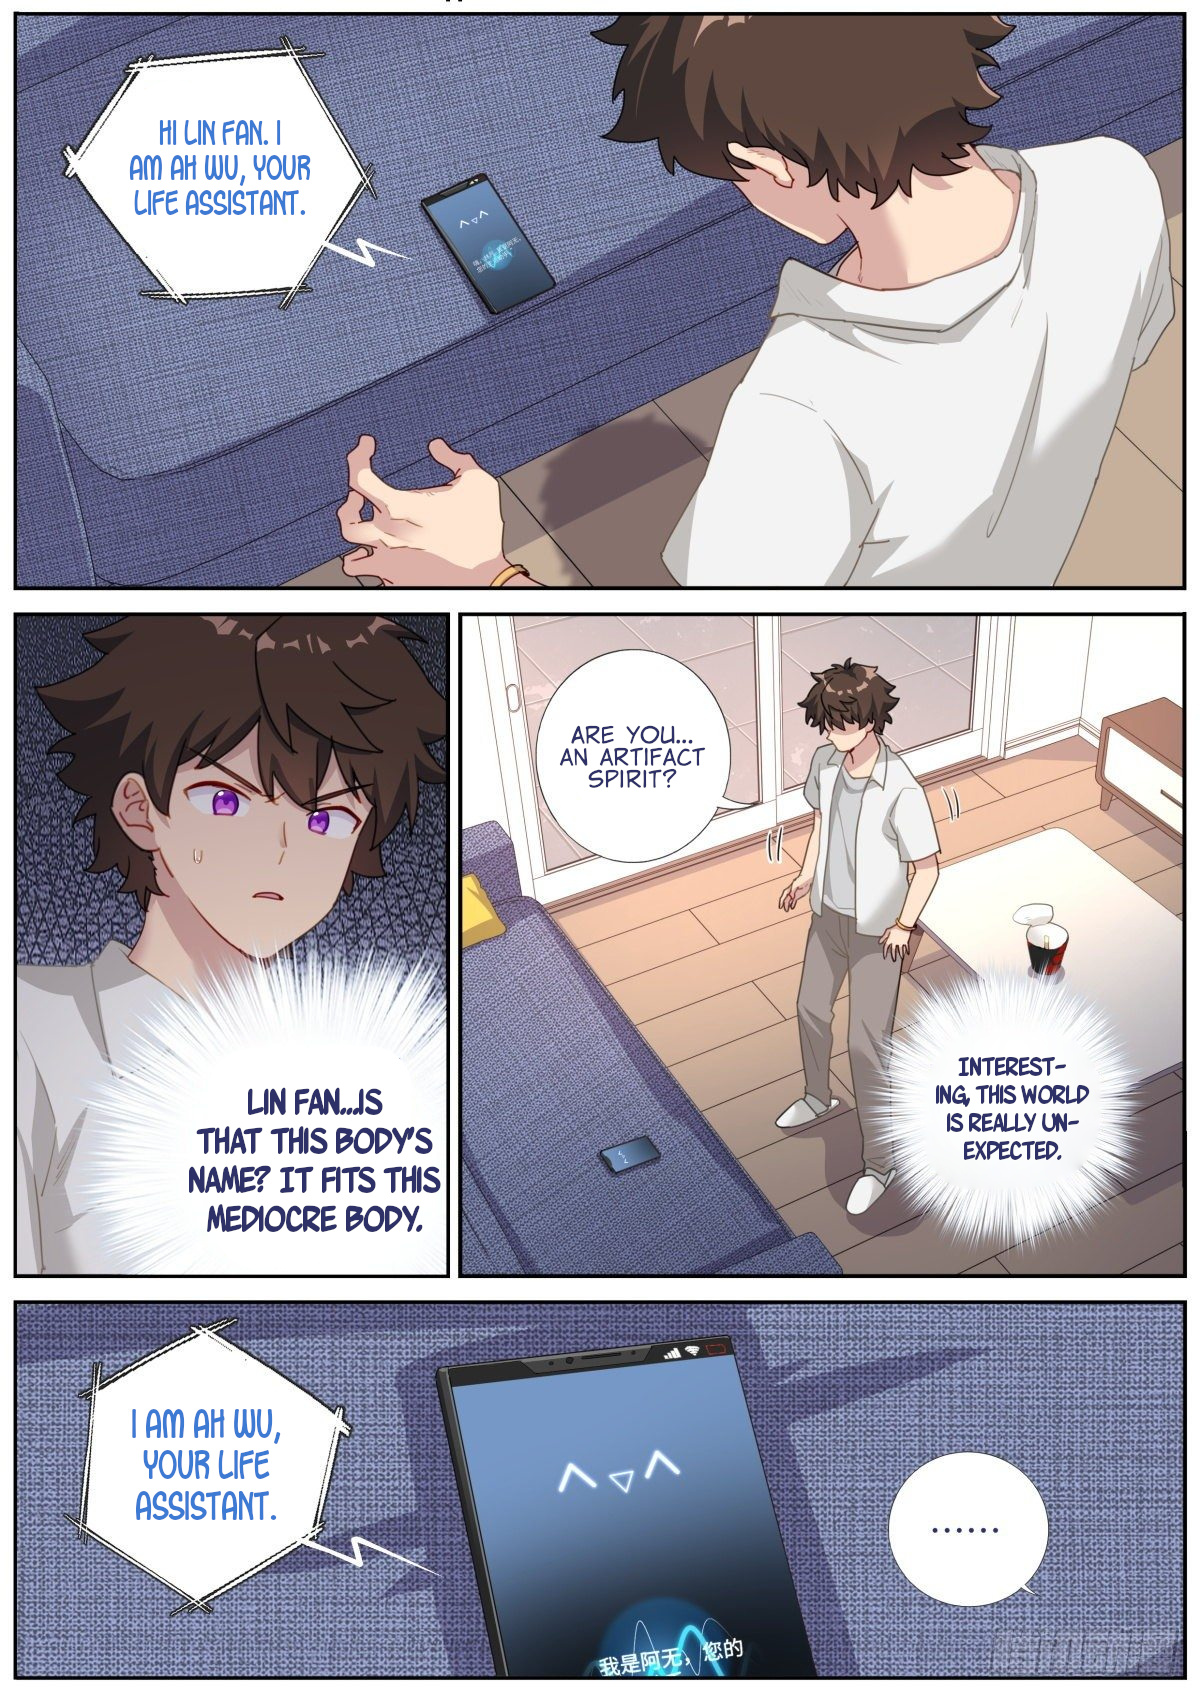 What Do You Do When You Suddenly Become An Immortal? - Page 2